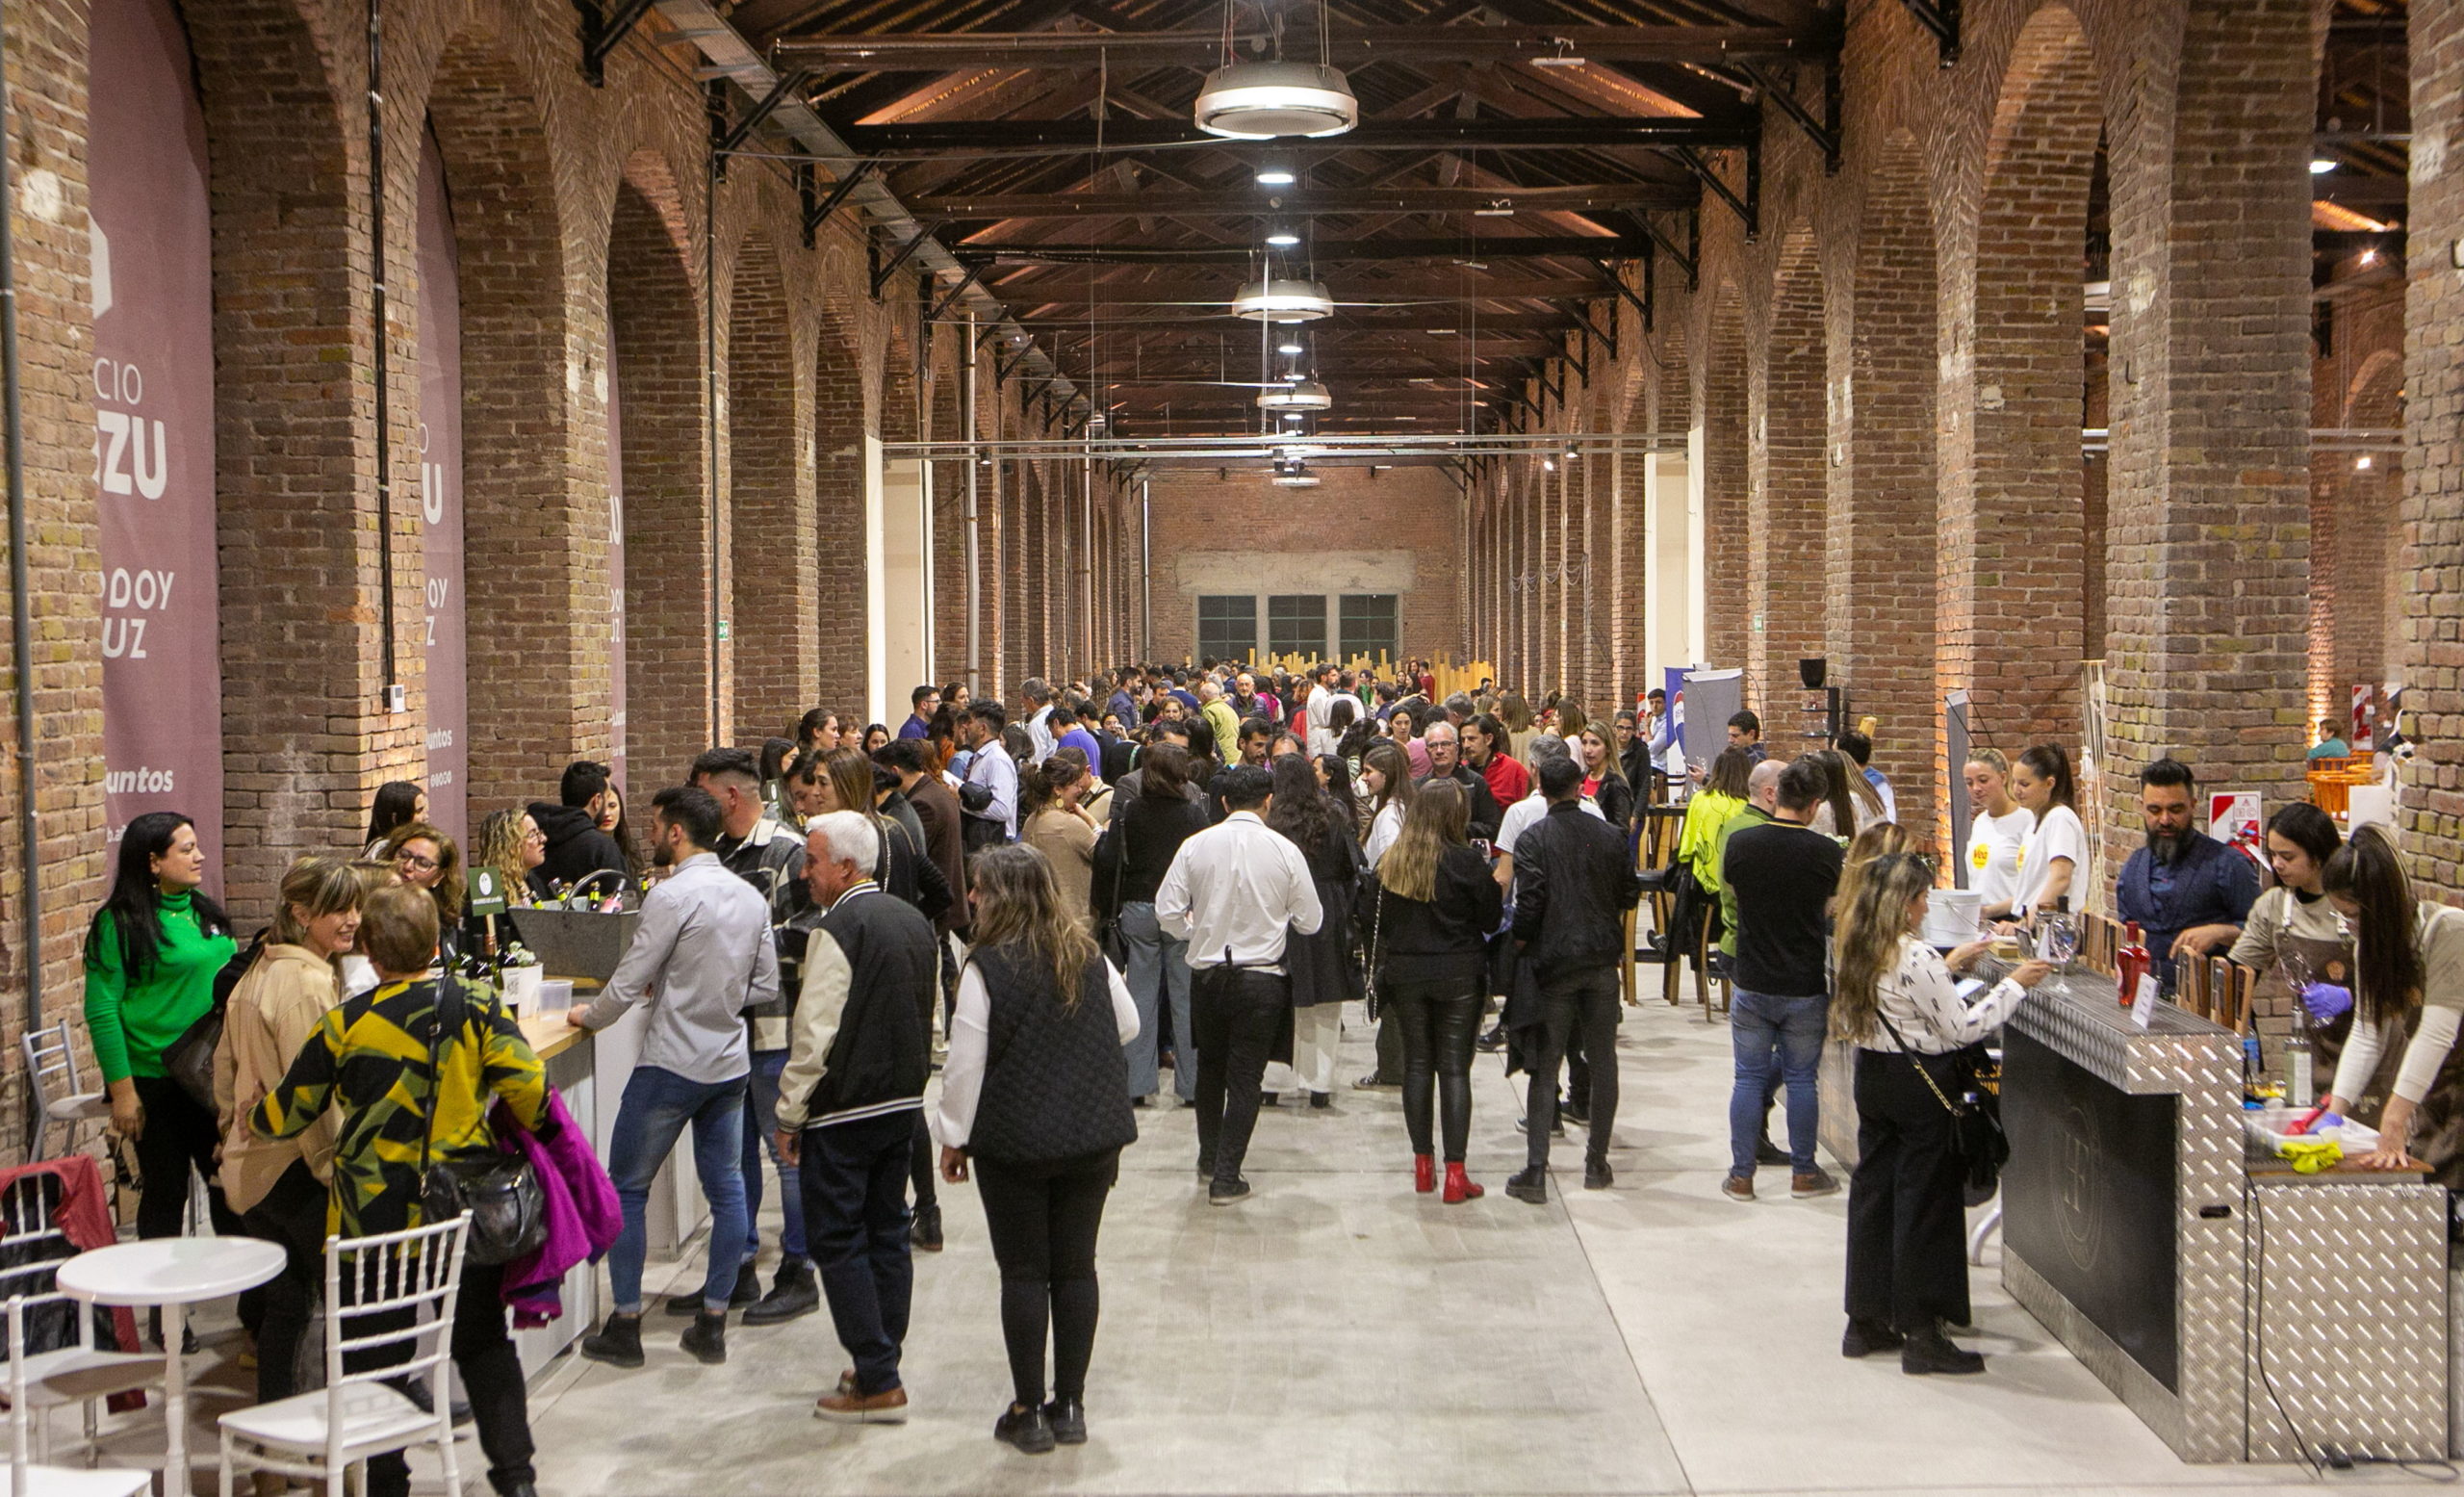 Declared of Provincial Tourism Interest, Dionisias Wine Fair brought together more than 1,500 people